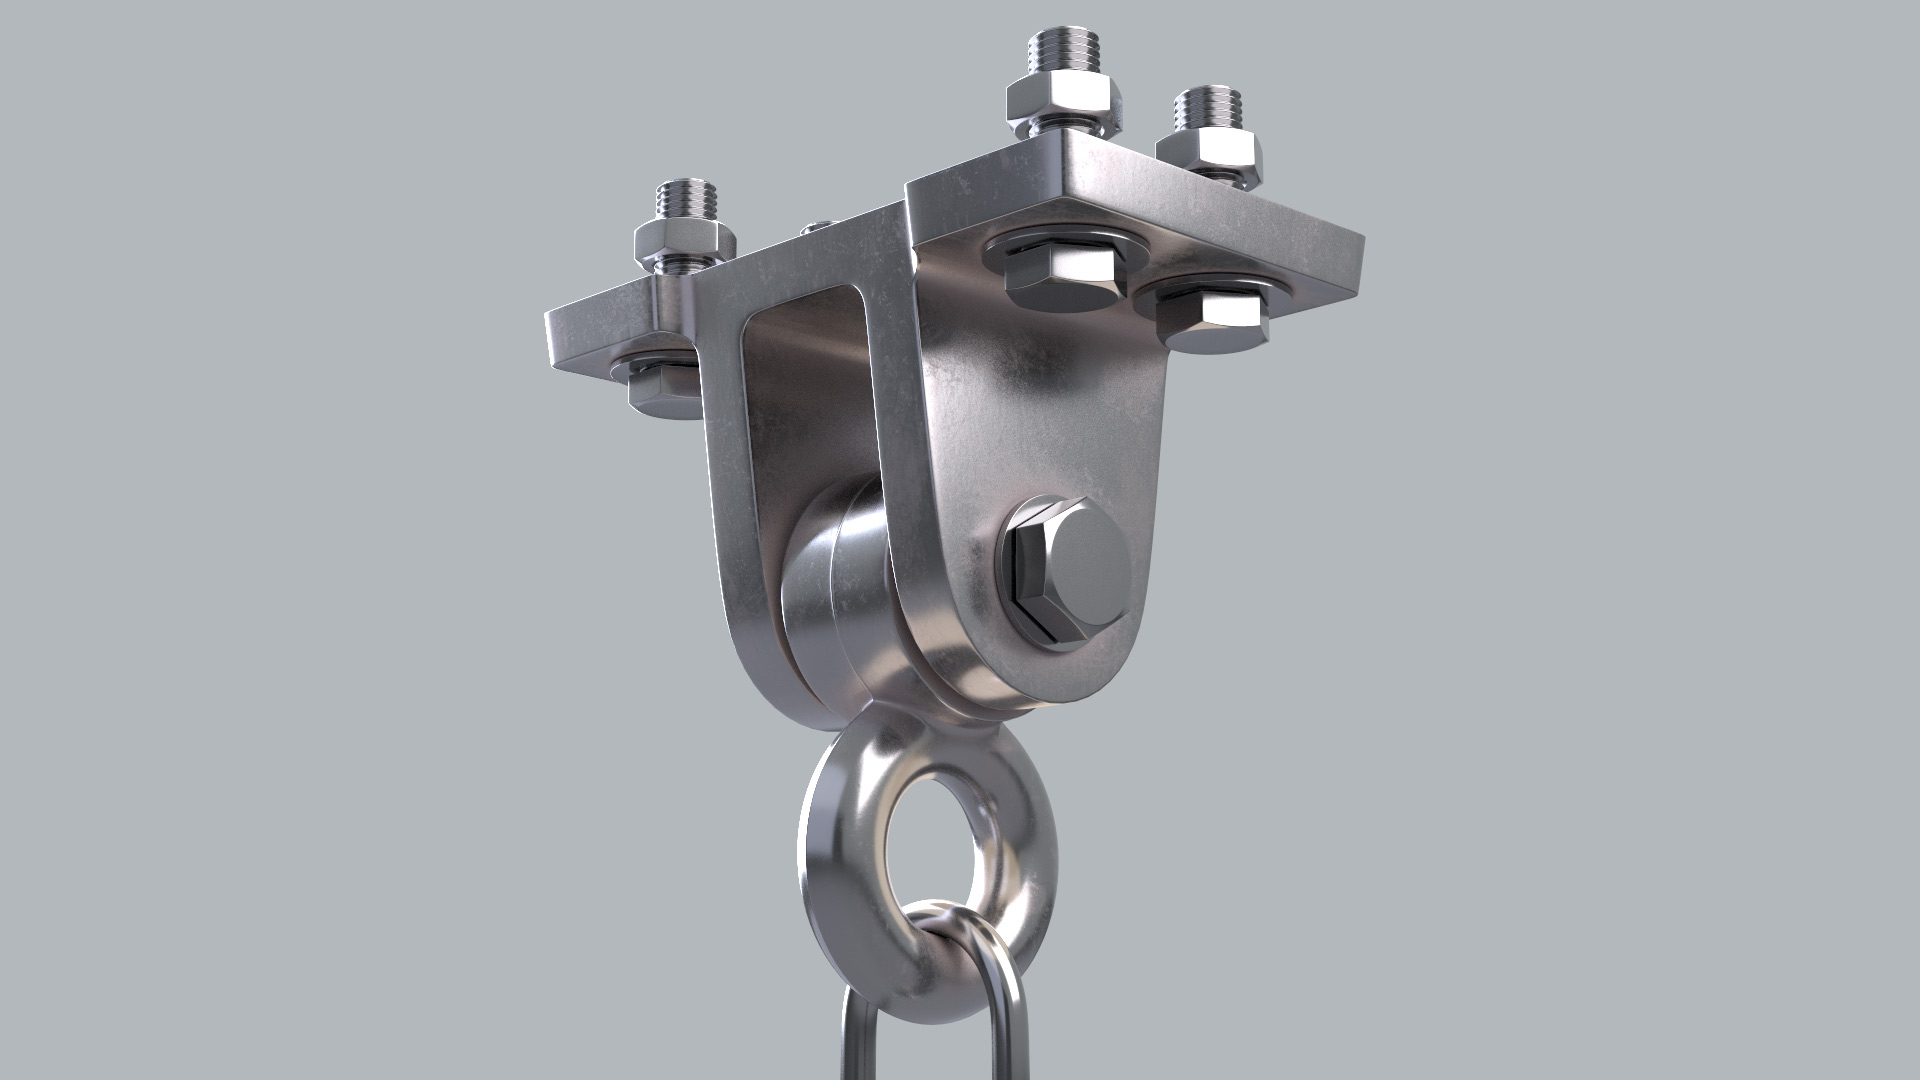 Store - 3D Model of a Swing Hanger - Close Low Angle View A